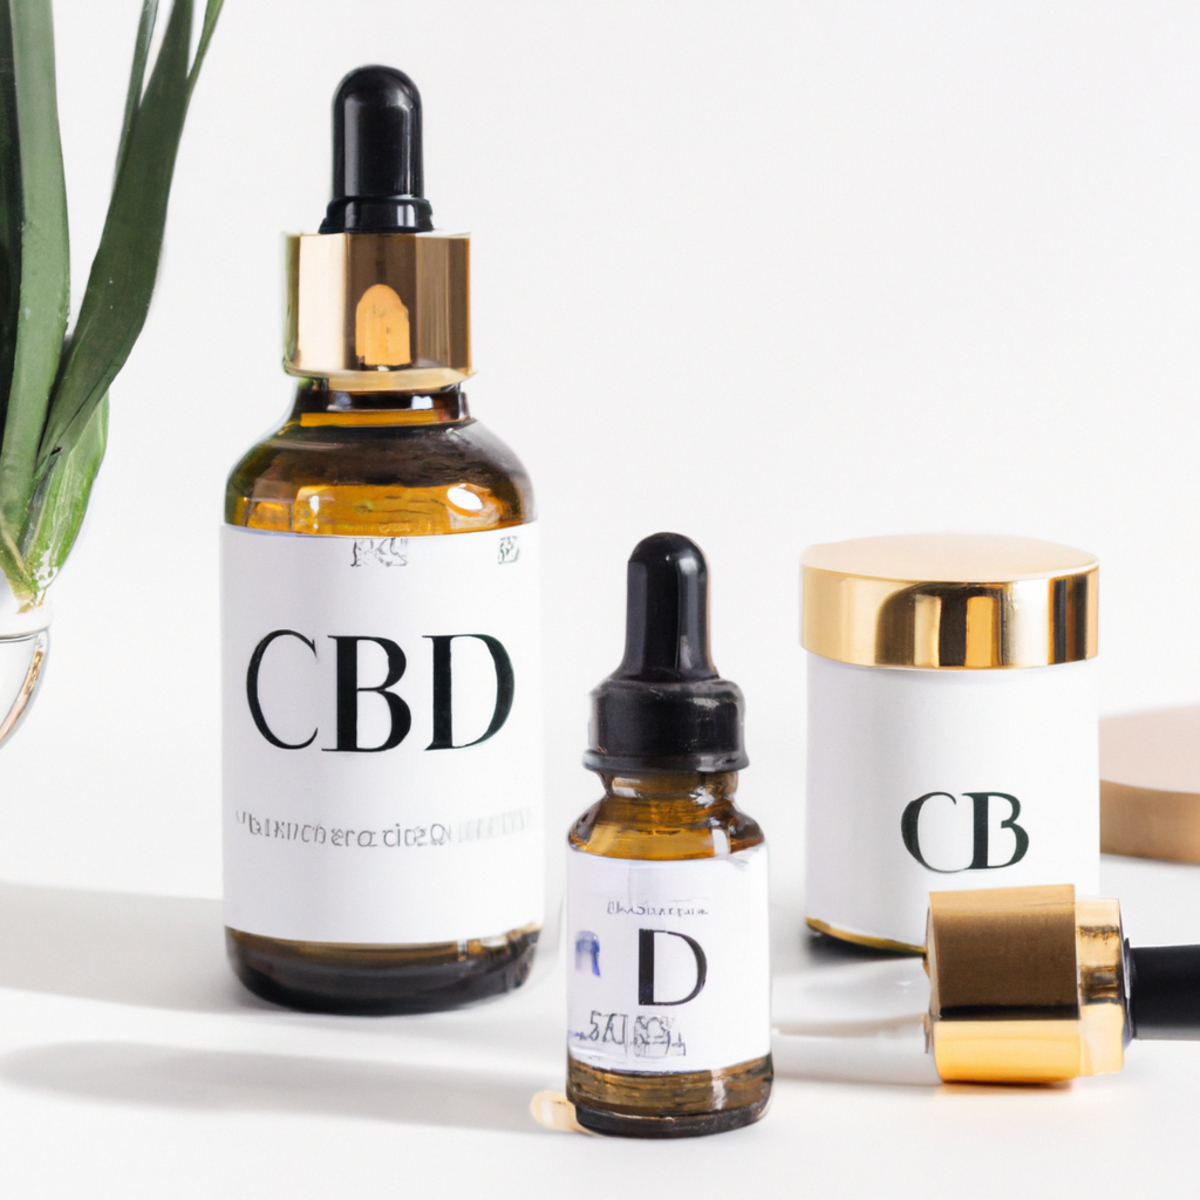 Get ready to glow with these CBD-infused natural skin care routines! From the silky serum to the nourishing eye cream, these luxurious products will have you feeling like a million bucks (without spending it).